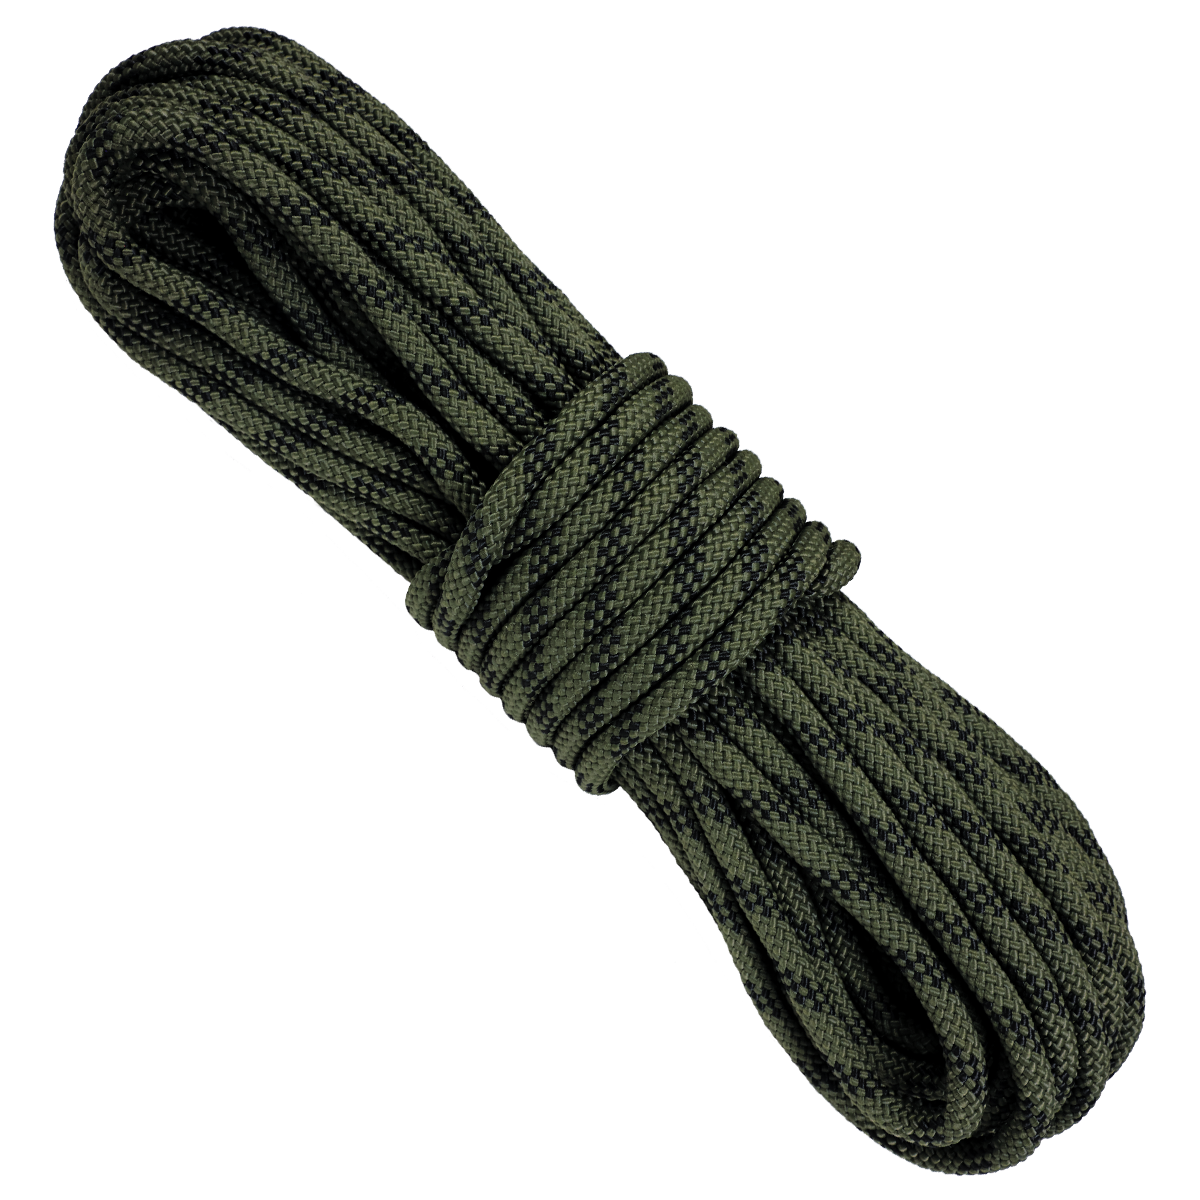 Nabnad Paracord 2mm 2mm Camo Camouflage Motif Imported China Is Smoother  Than The Nabnad Price Per Meter